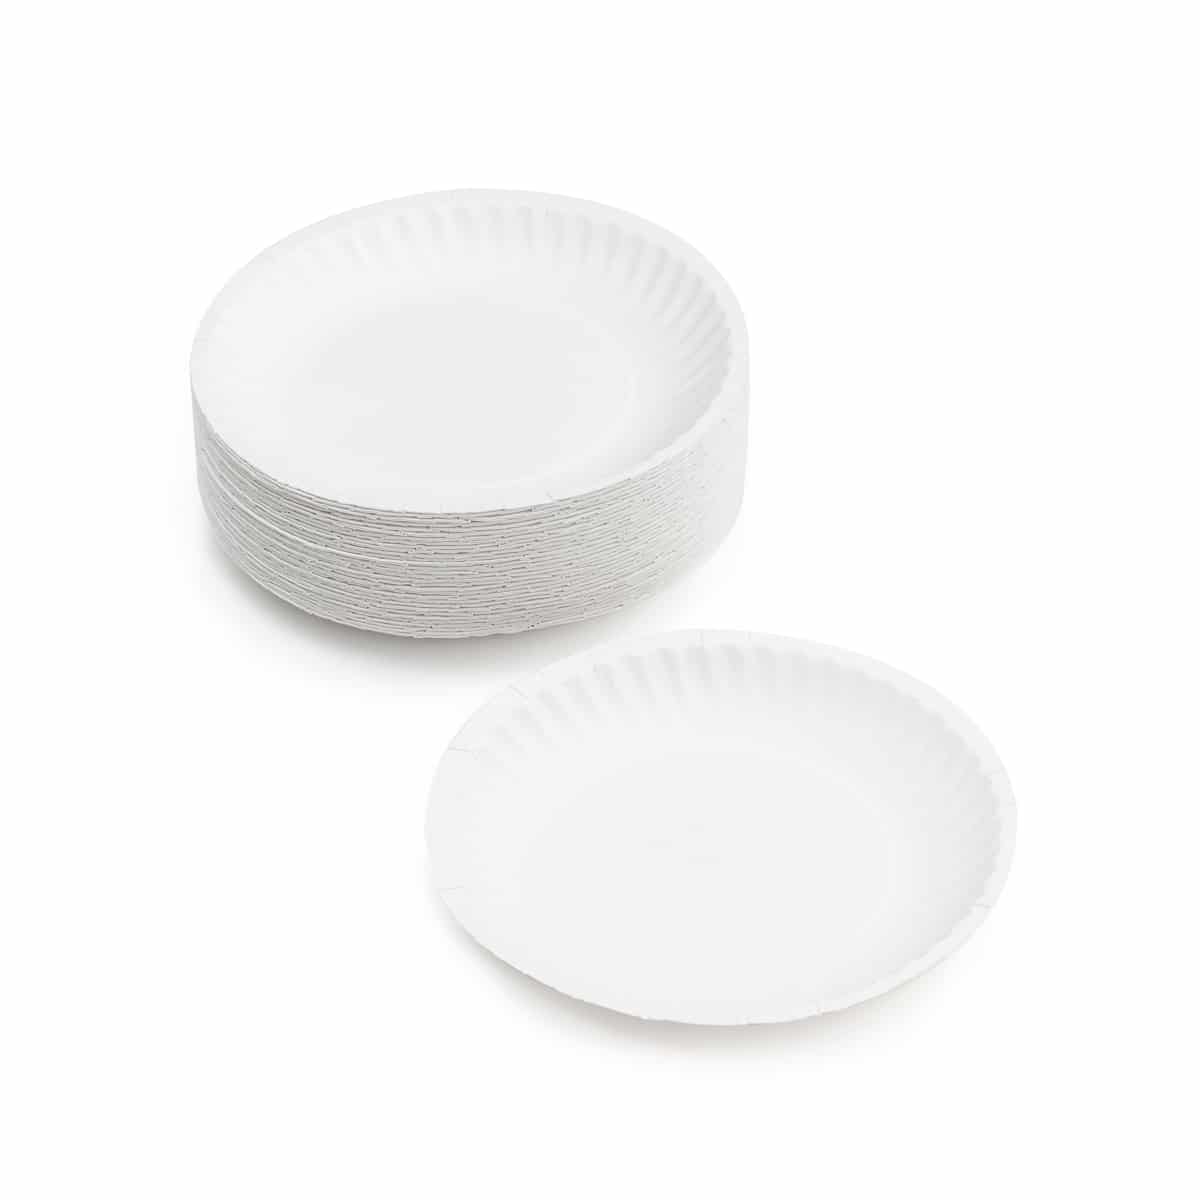  Hygloss Products Paper Plates - Uncoated White Plate - Use for  Foodware, Events, Activities, Crafts Projects and More - Environmentally  Friendly - Recyclable and Disposable - 6-Inches - 100 Pack : Everything Else